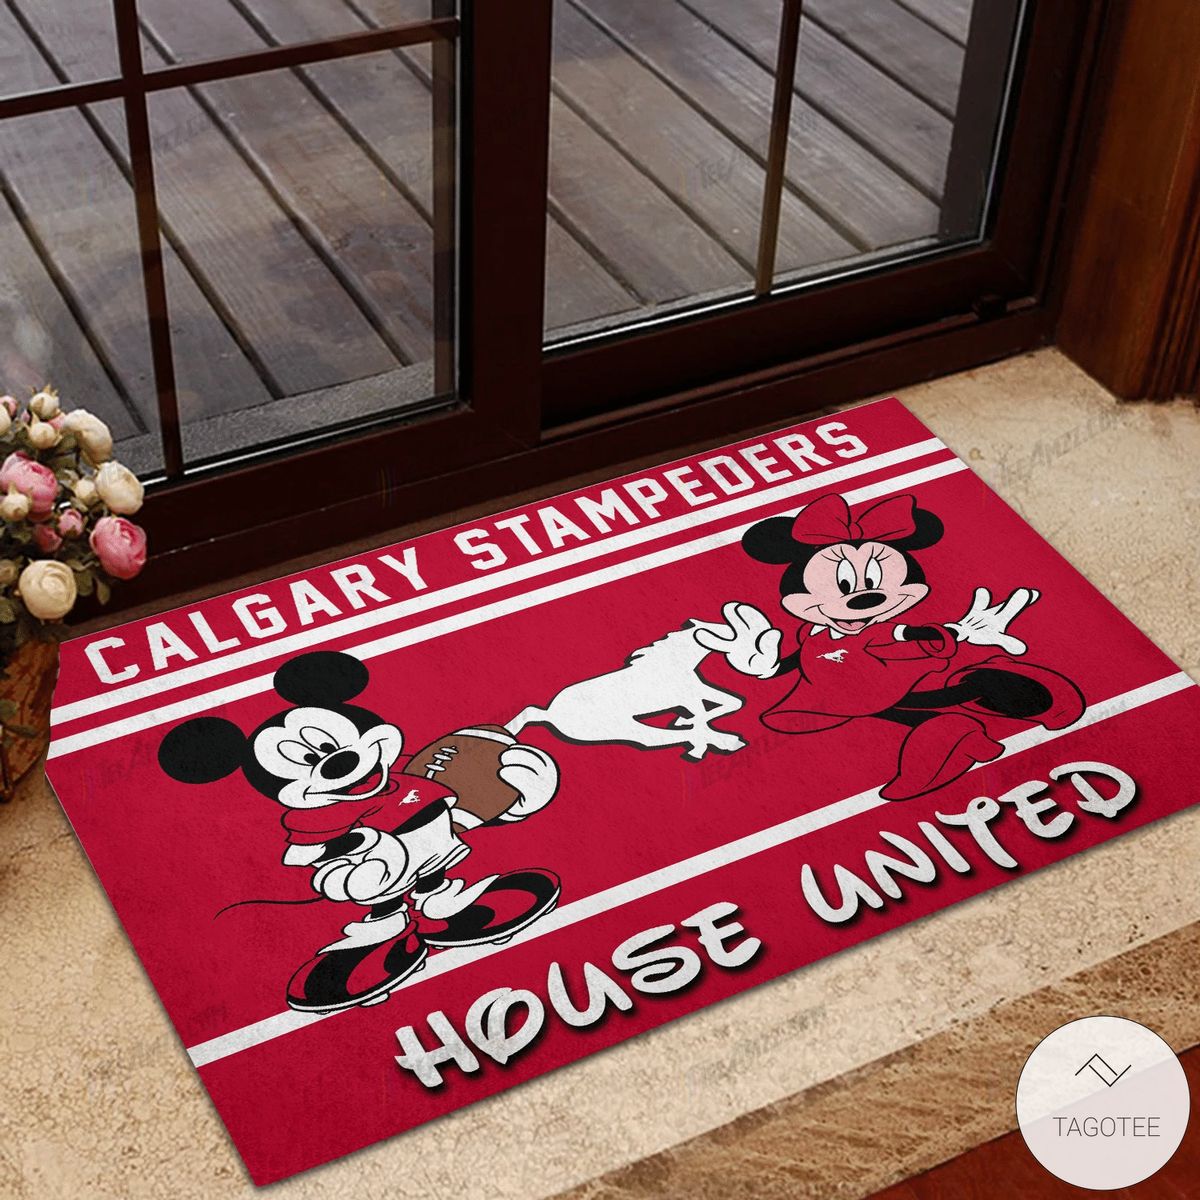 Calgary Stampeders House United Mickey Mouse And Minnie Mouse Doormat  – TAGOTEE